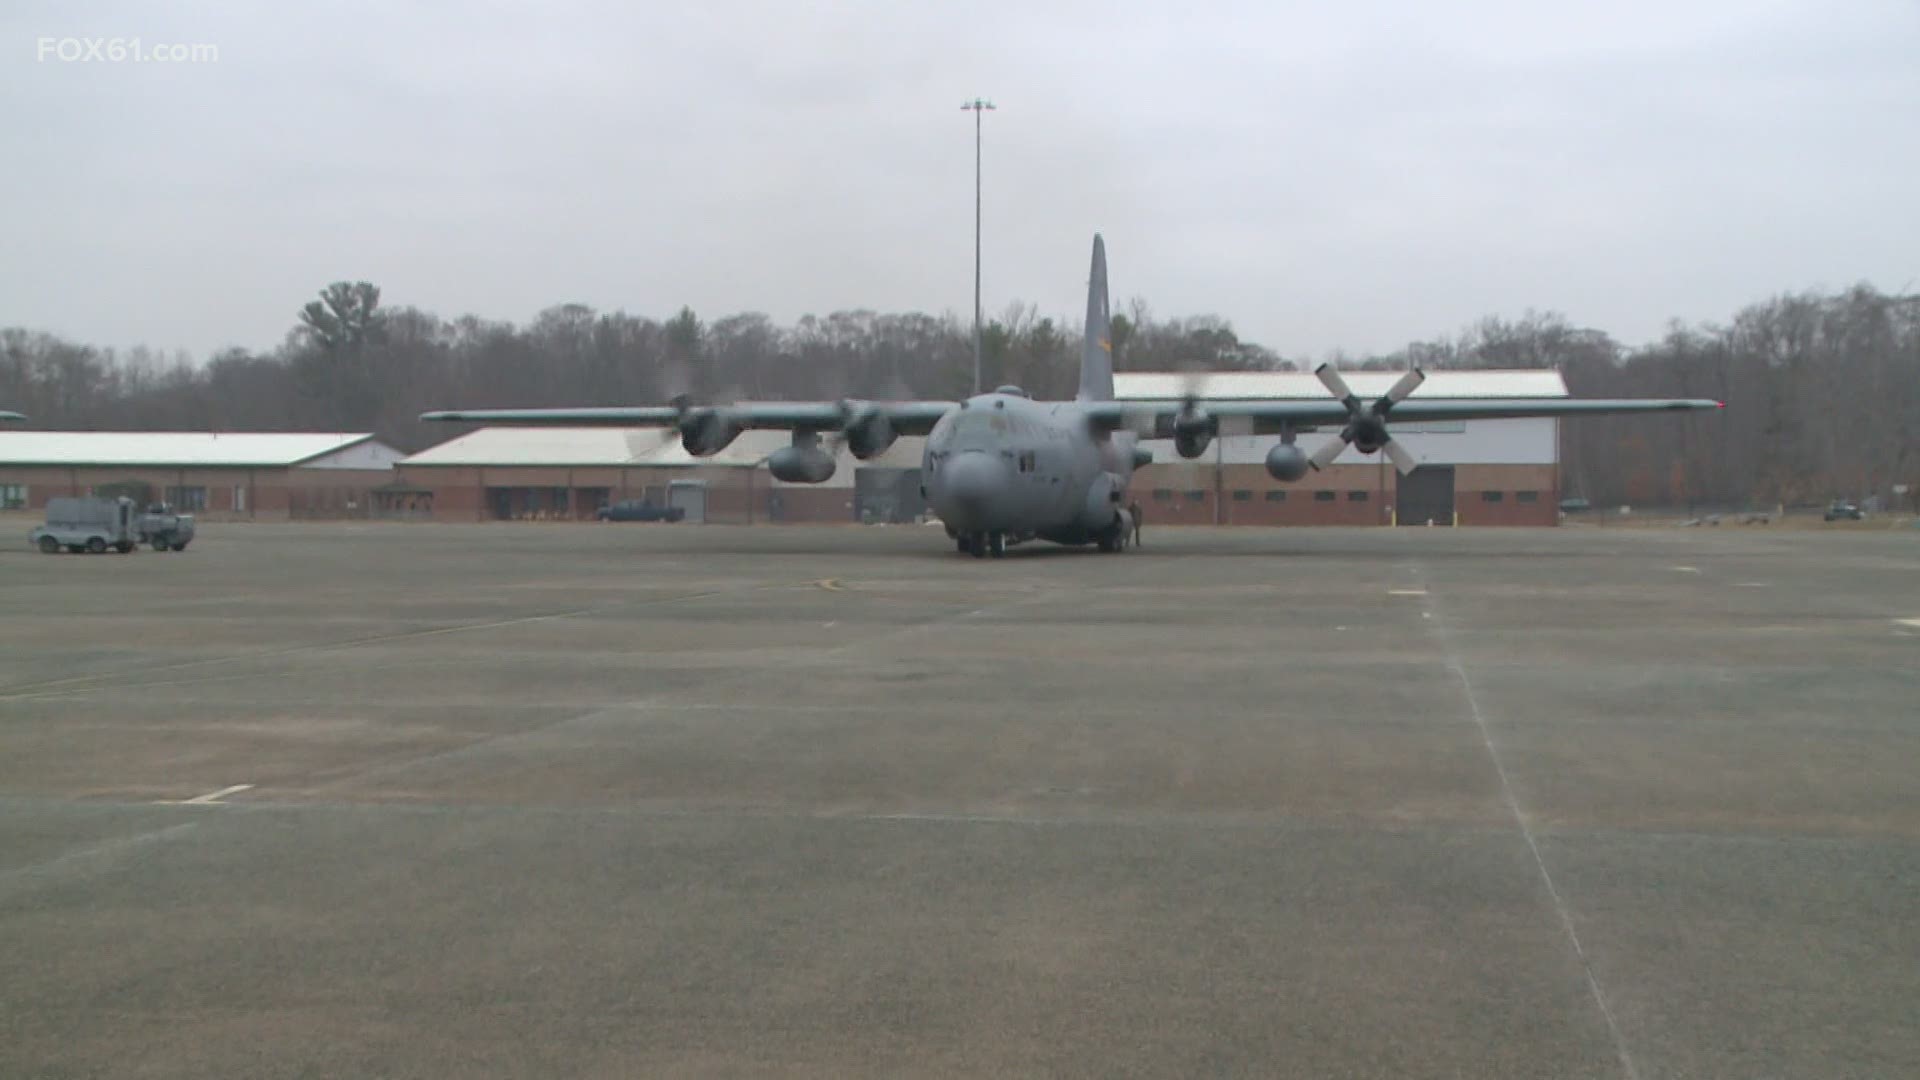 Connecticut's Air Guard has placed C-130H aircraft and crews on alert status.